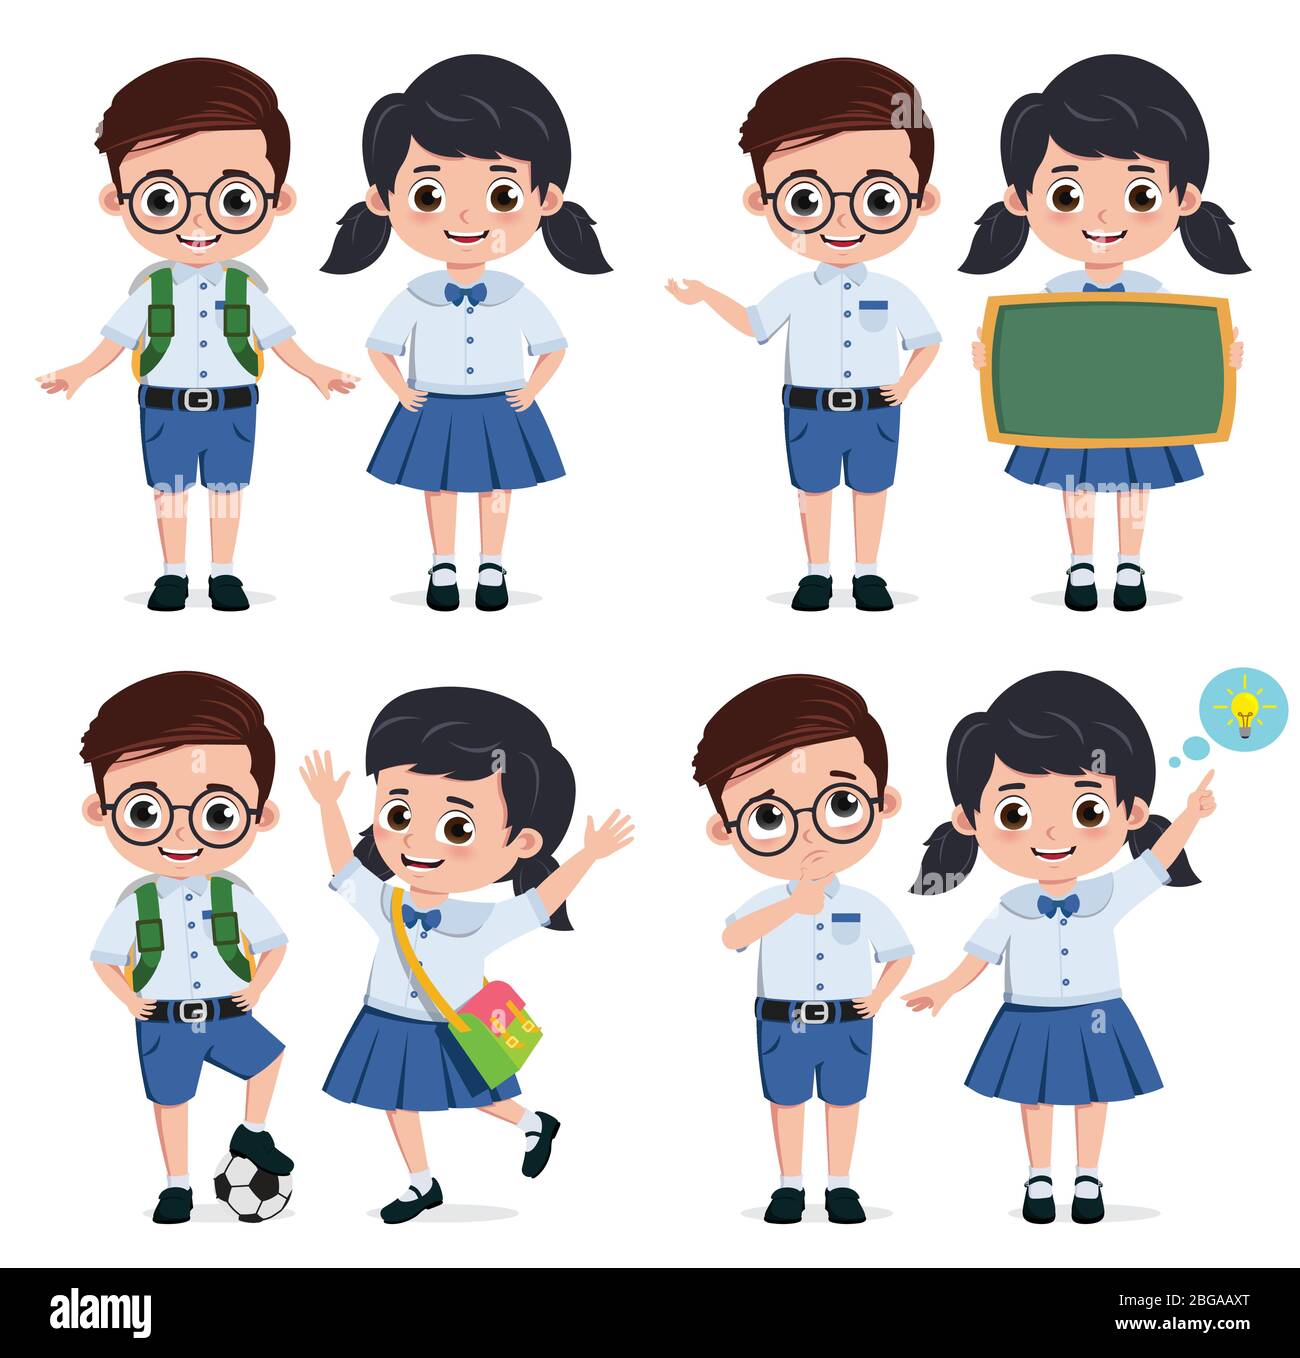 School students vector characters set. Back to school classmates elementary student characters in education activities like presenting and playing. Stock Vector